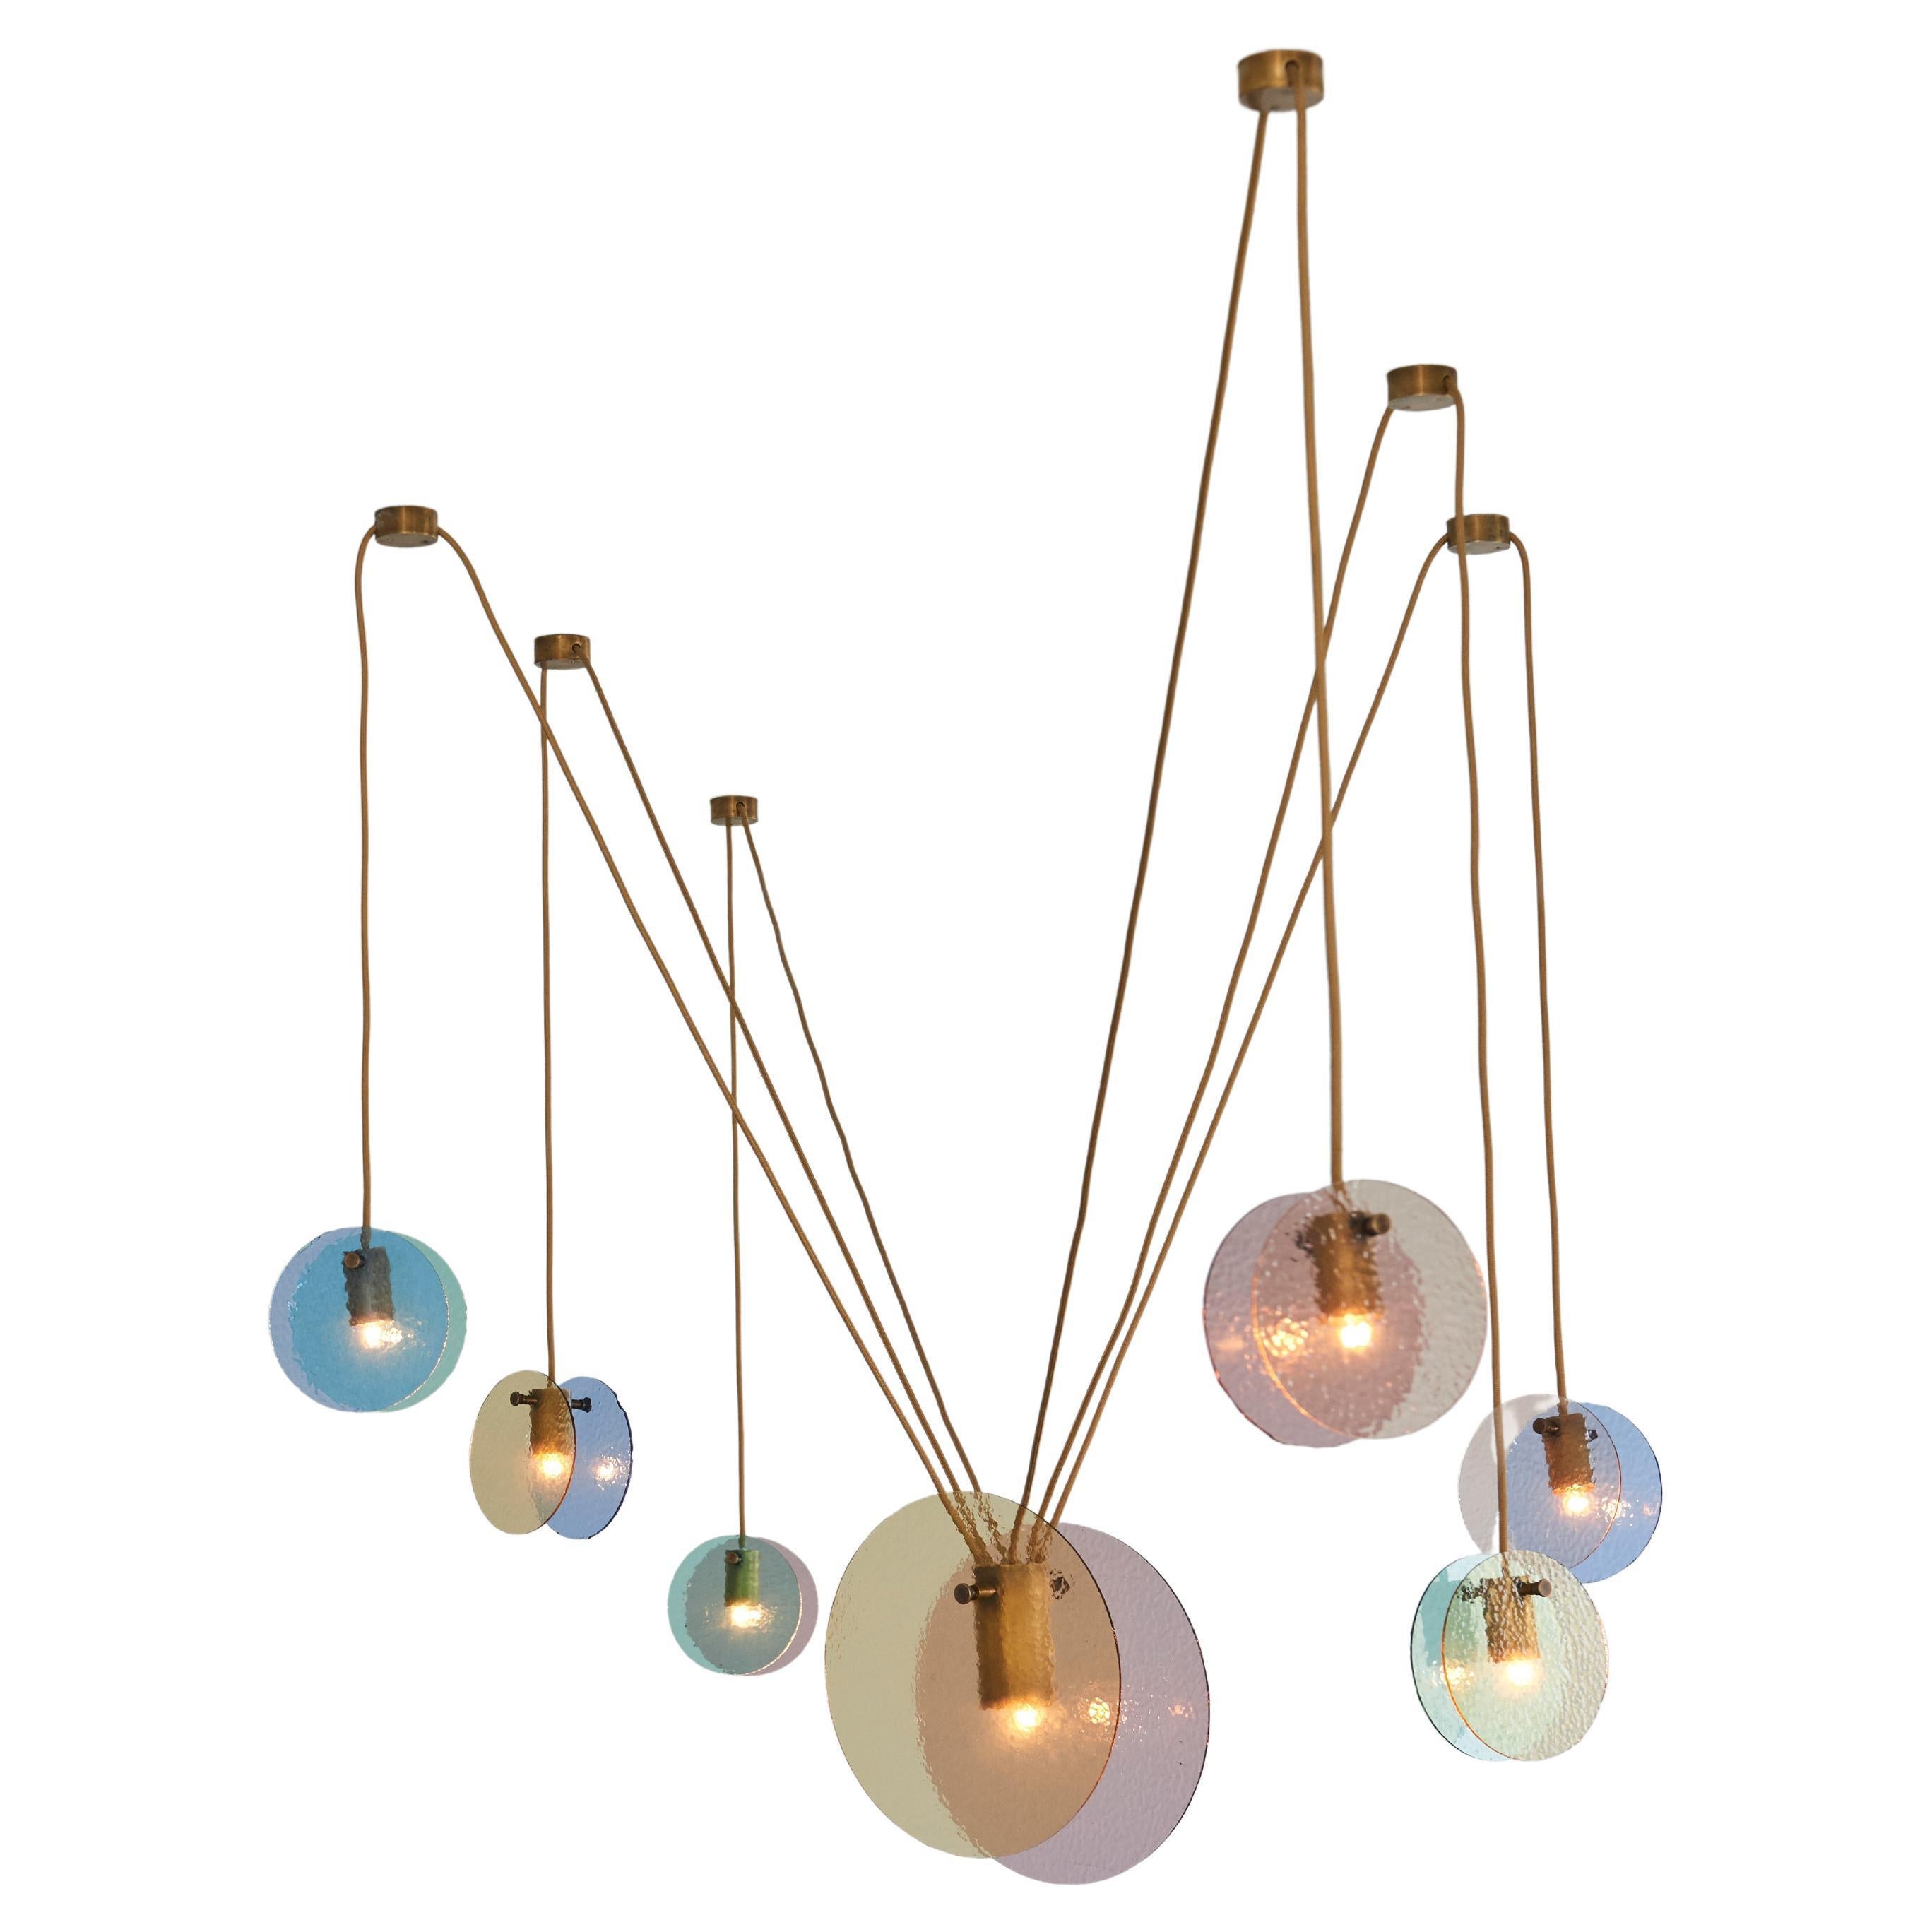 Kalupso 6 Satellites Ceiling Light by Moure Studio For Sale